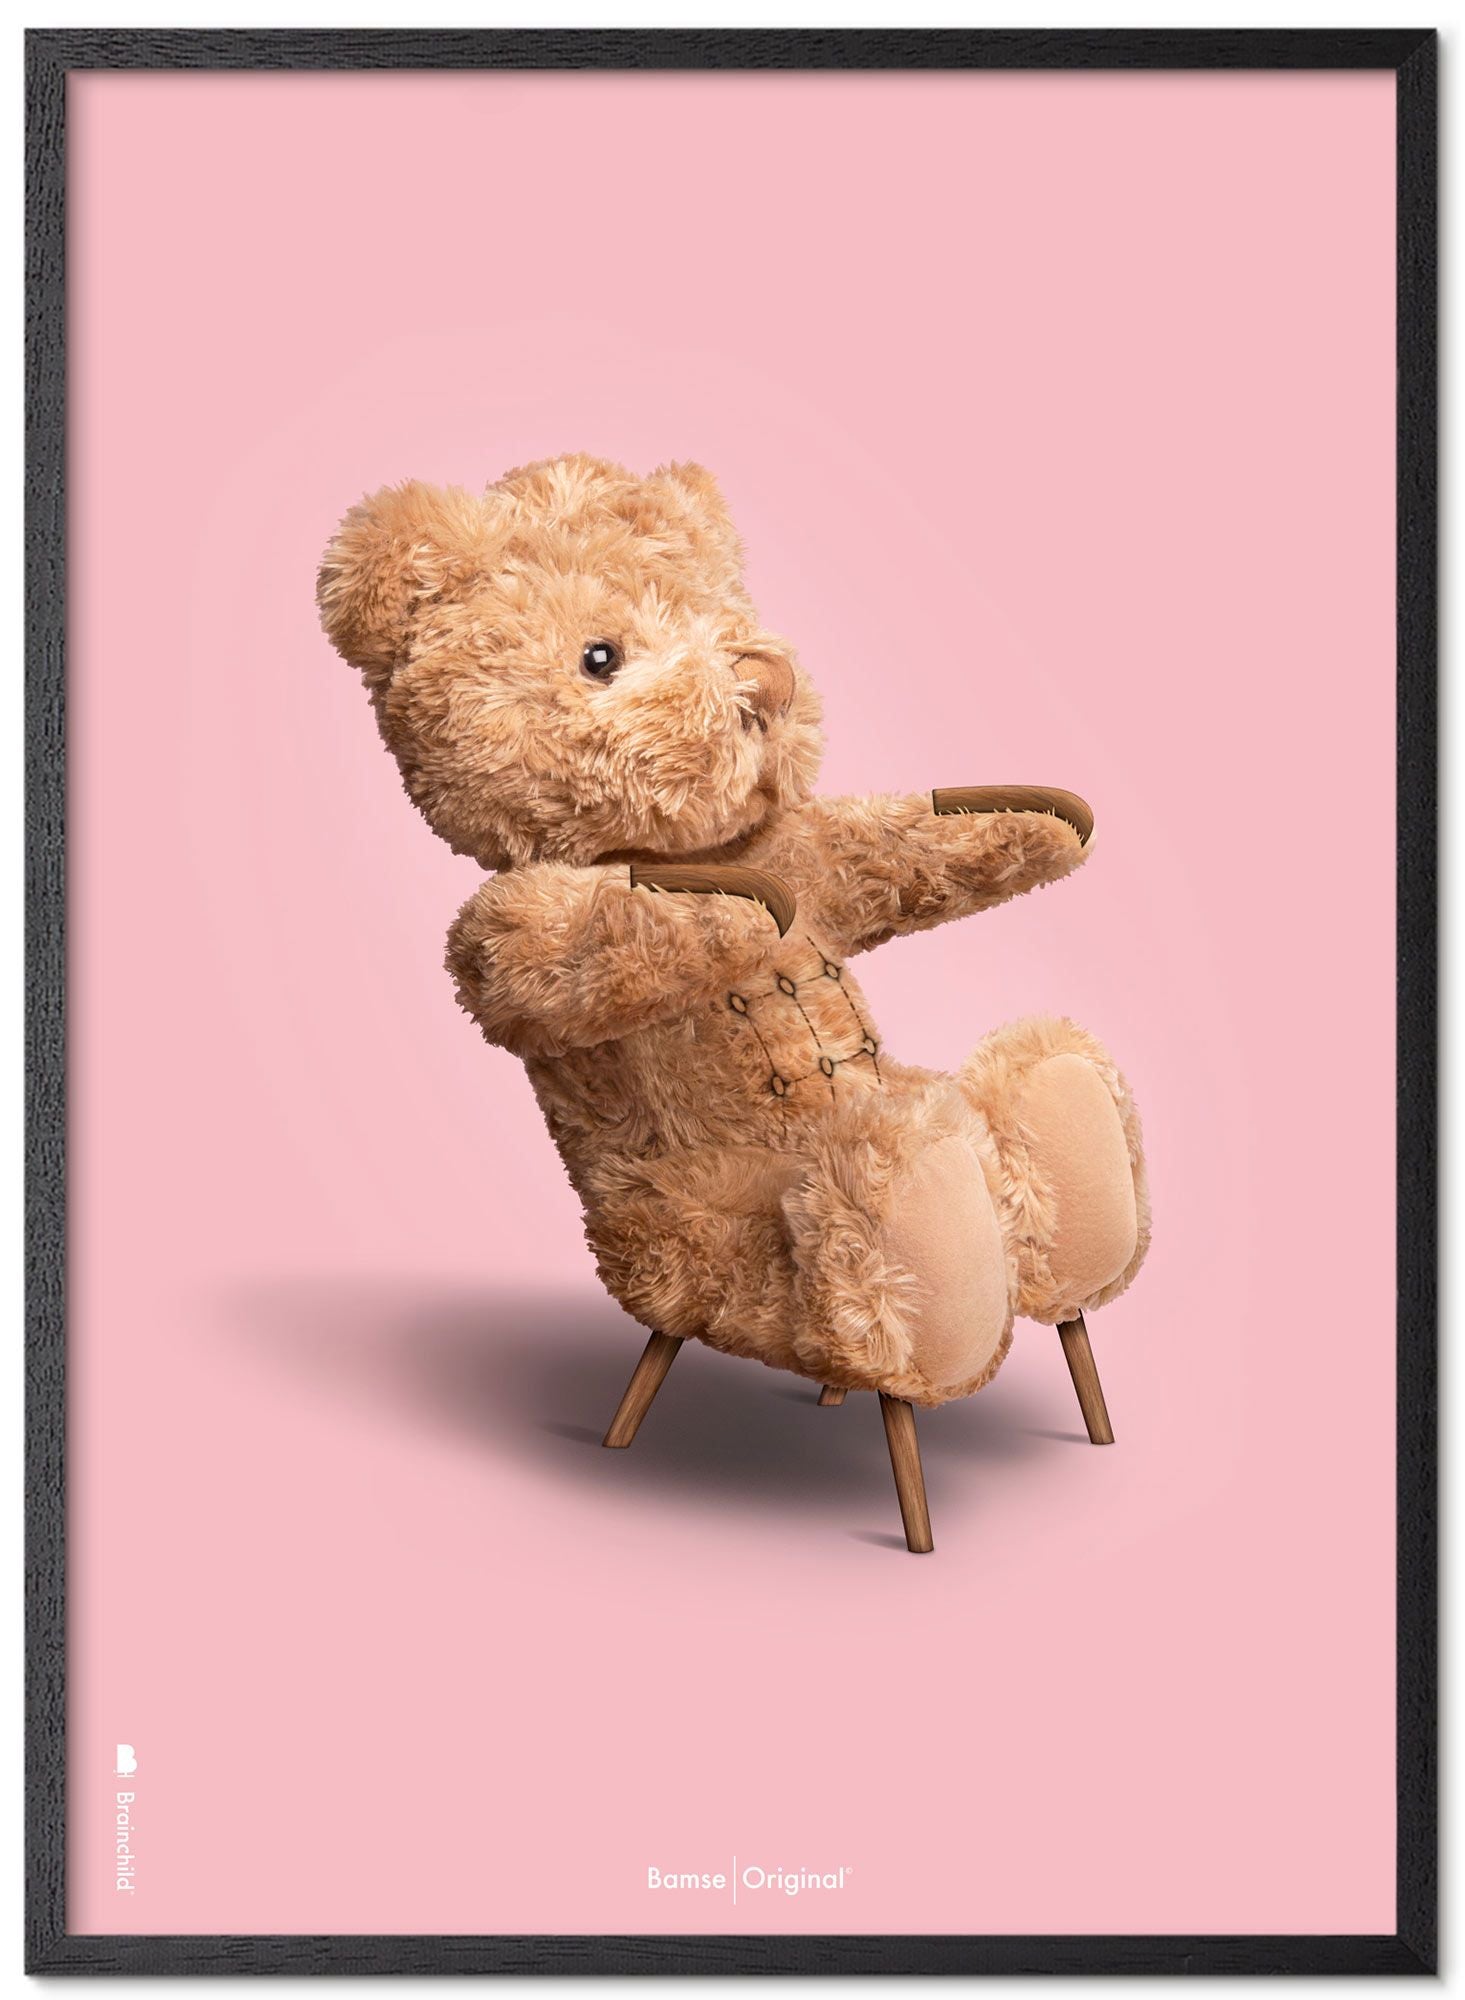 Brainchild Teddy Bear Classic Poster Frame In Black Lacquered Wood A5, Pink Background